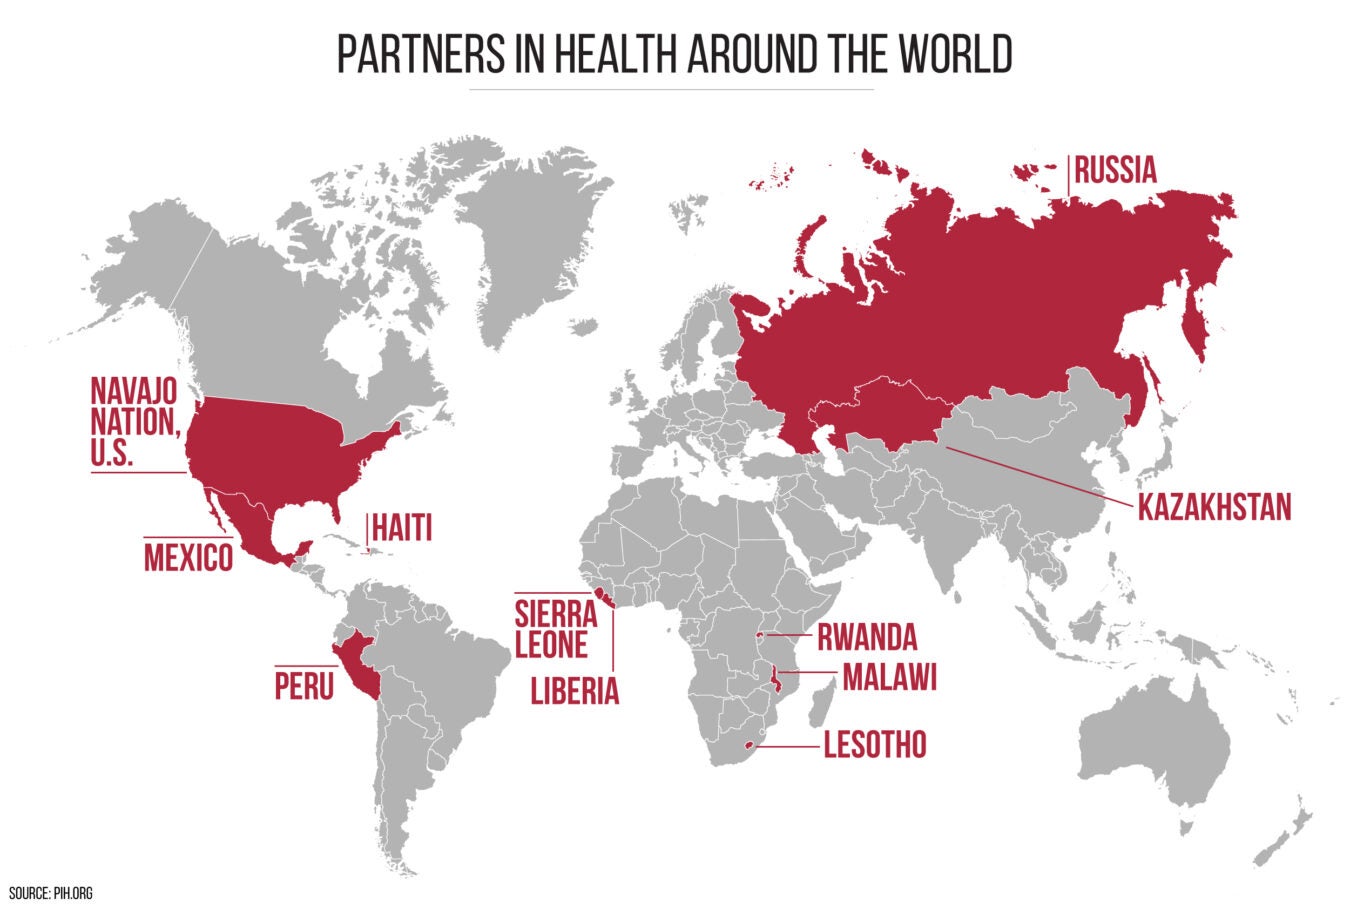 World map marking countries where Partners in Health has programs.